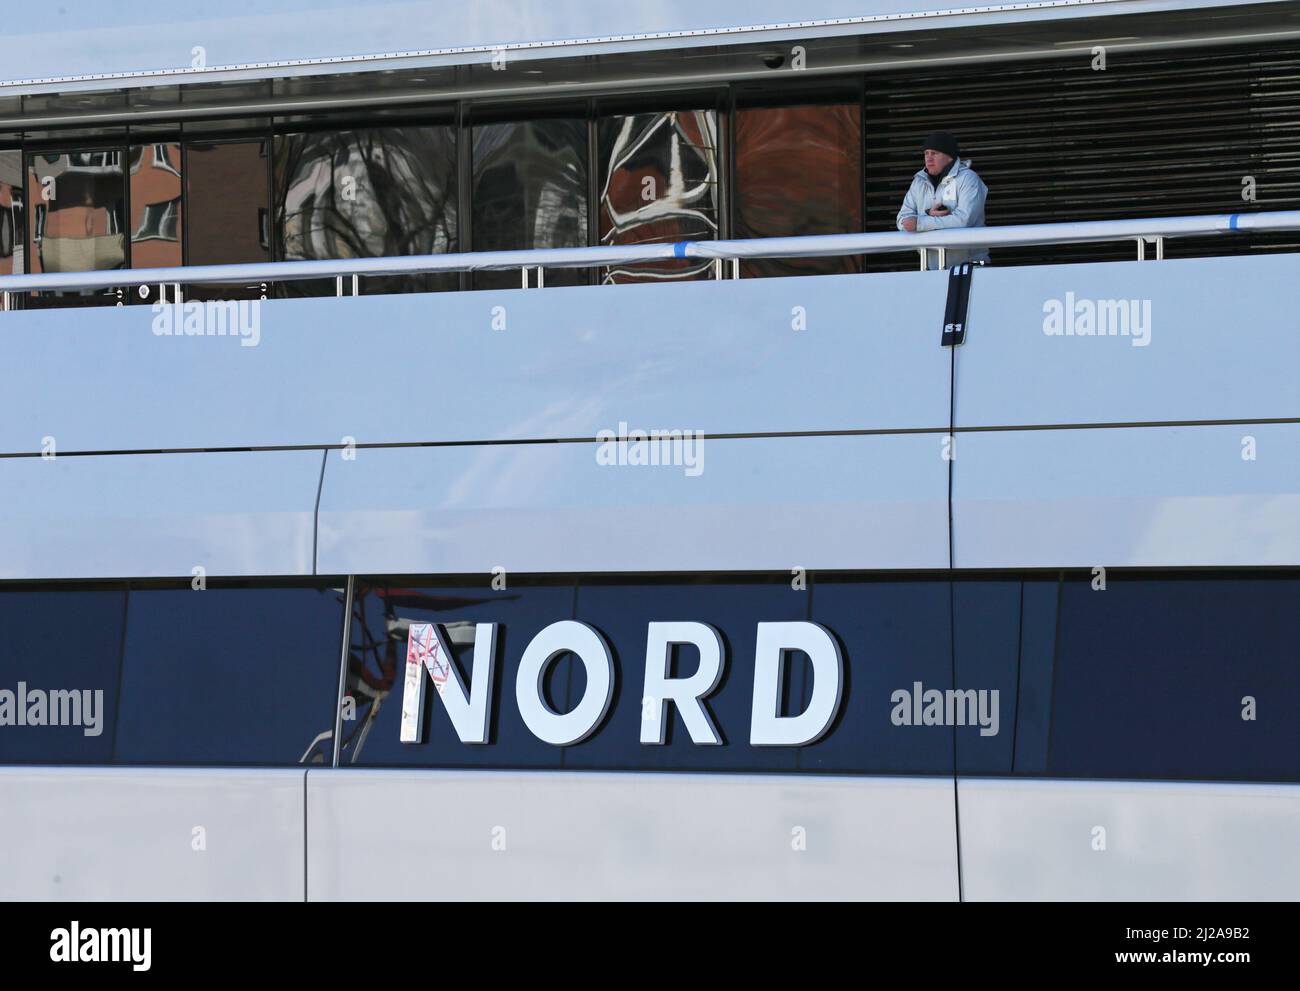 A man is seen aboard the superyacht Nord, reportedly owned by the sanctioned Russian oligarch Alexei Mordashov, which is docked in the far eastern port of Vladivostok, Russia March 31, 2022. REUTERS/REUTERS PHOTOGRAPHER Stock Photo